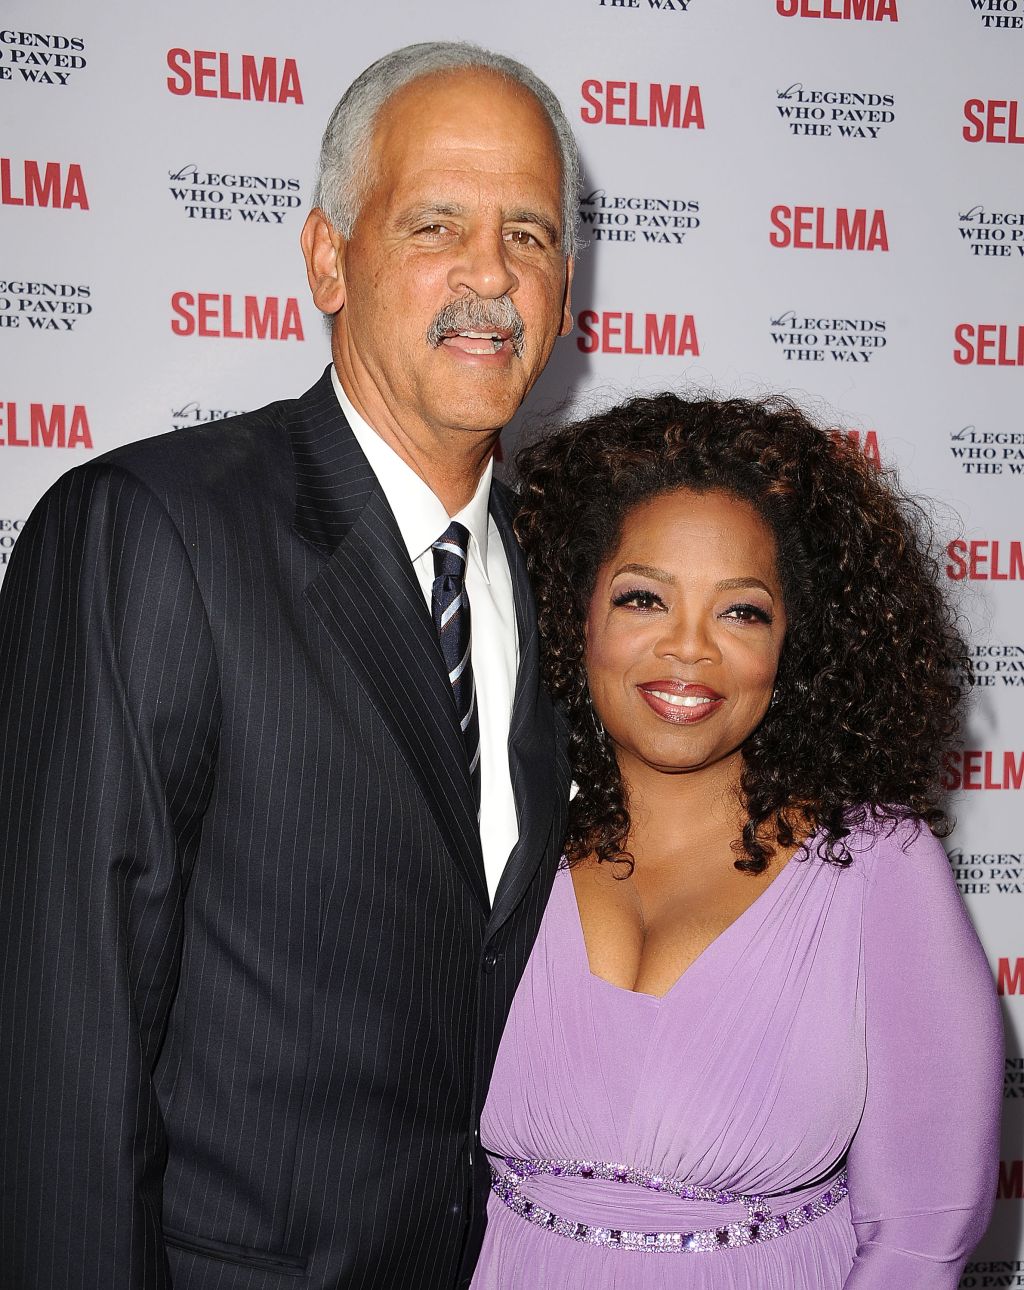 'Selma' And The Legends Who Paved The Way Gala